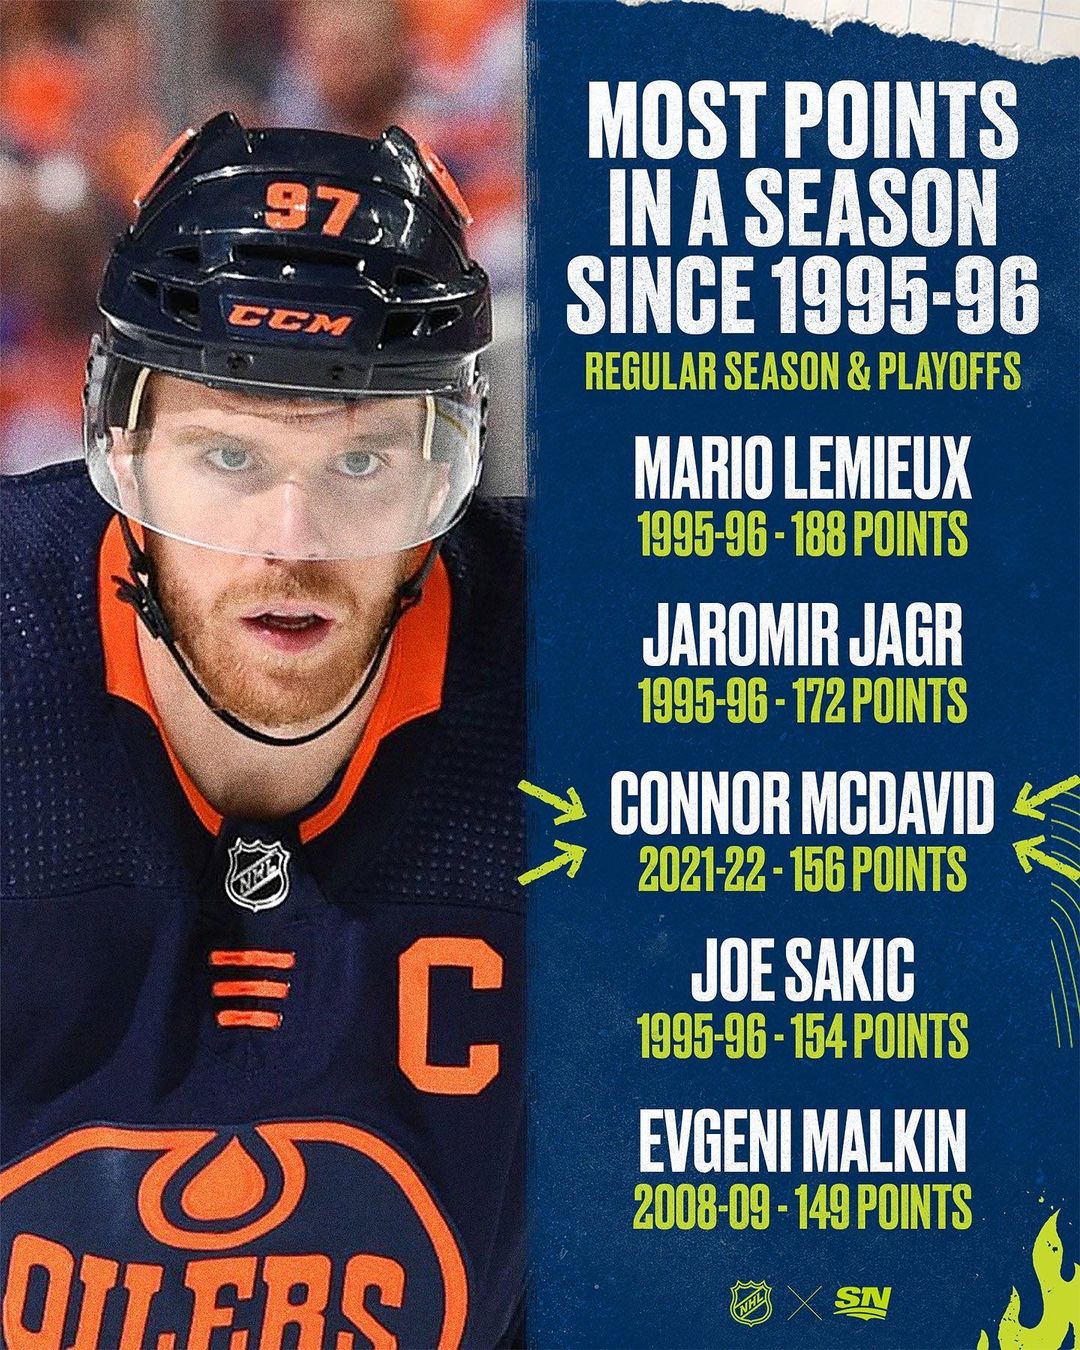 It was a season to remember for Connor McDavid!...